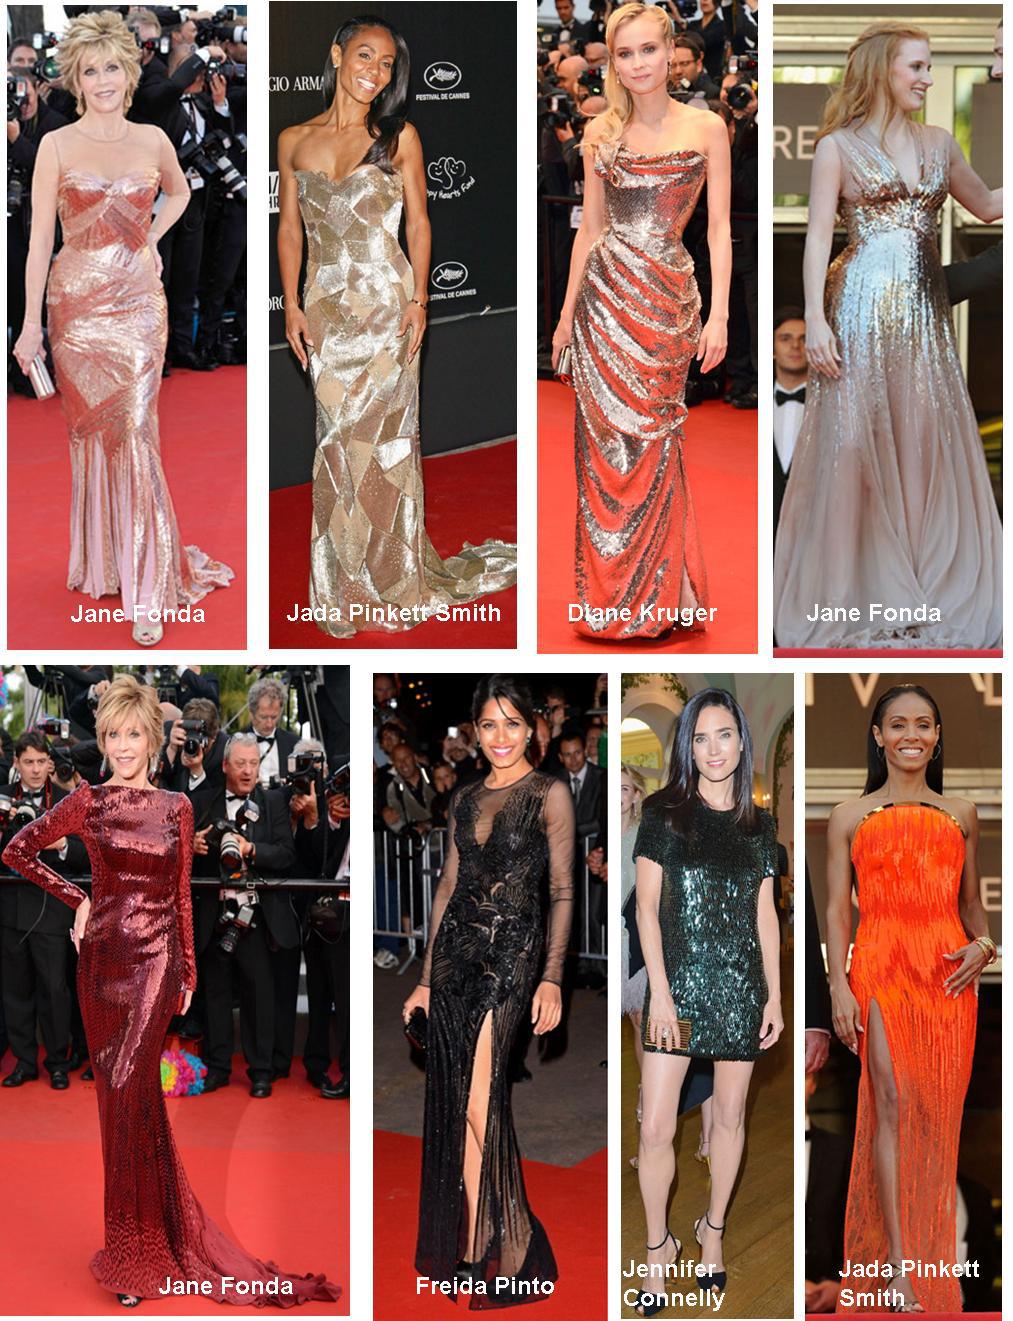 celeb gowns